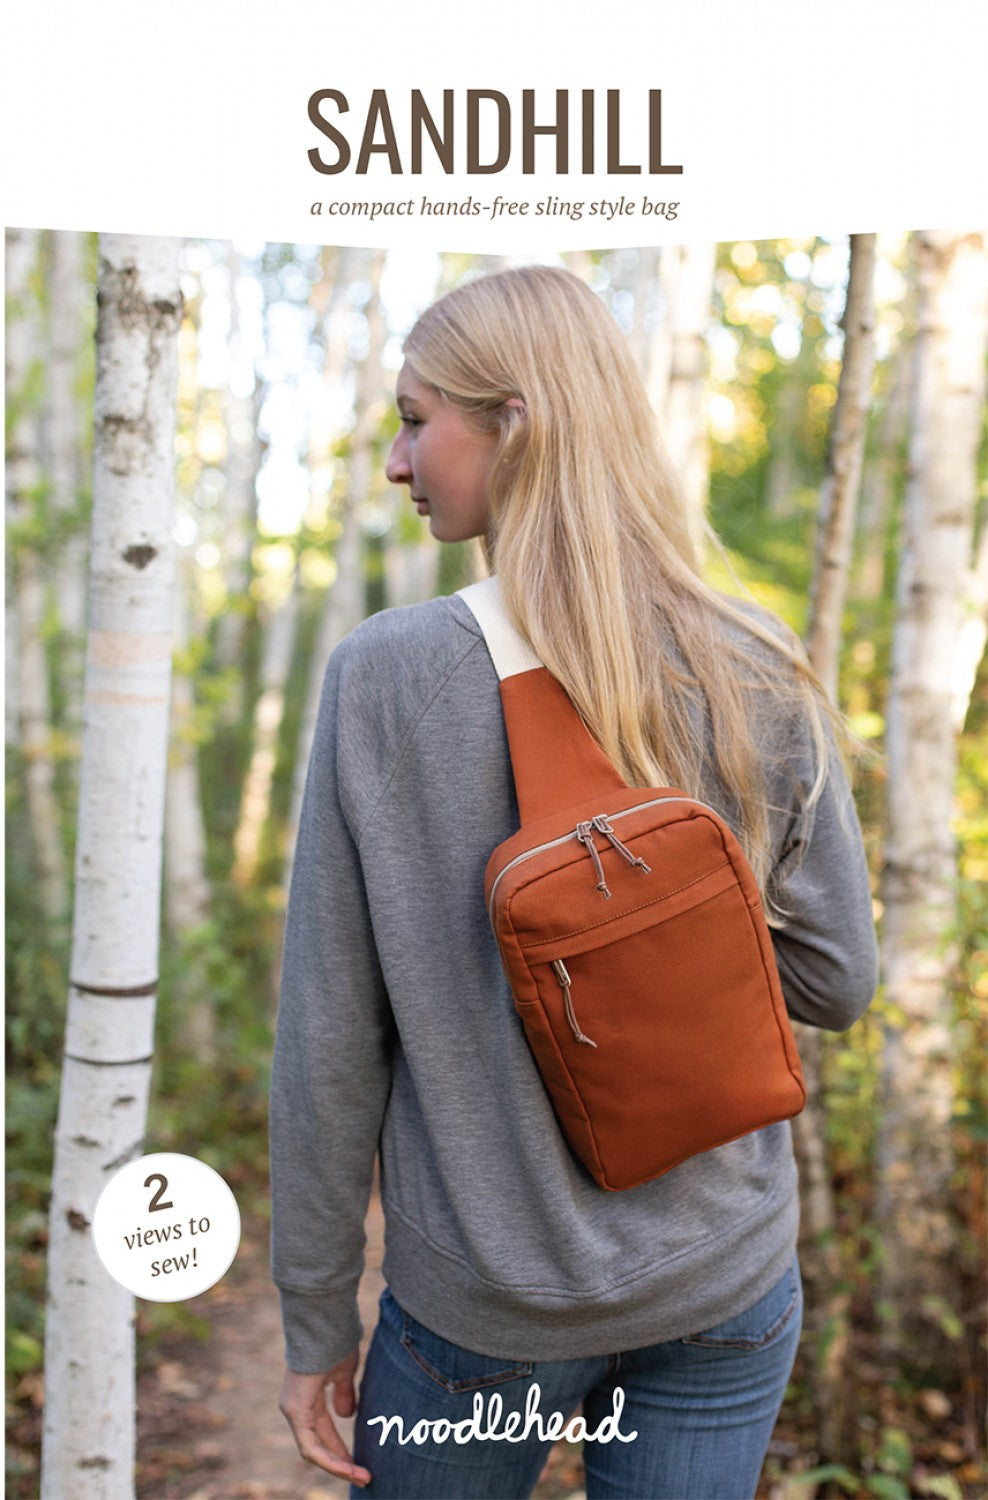 Sandhill Sling Bag Sewing Pattern by Anna Graham for Noodlehead